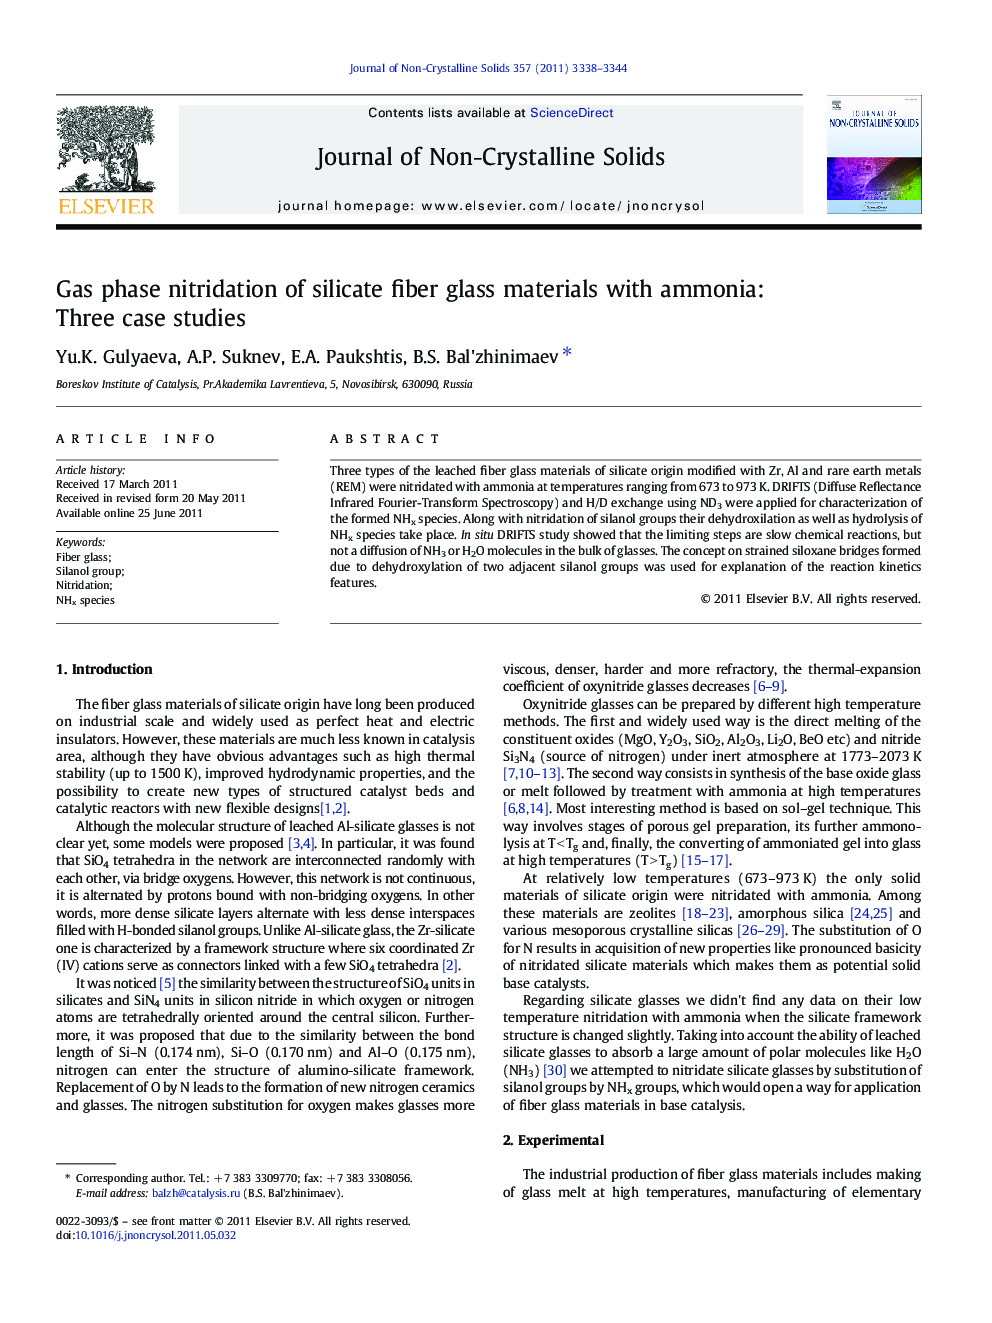 Gas phase nitridation of silicate fiber glass materials with ammonia:Three case studies